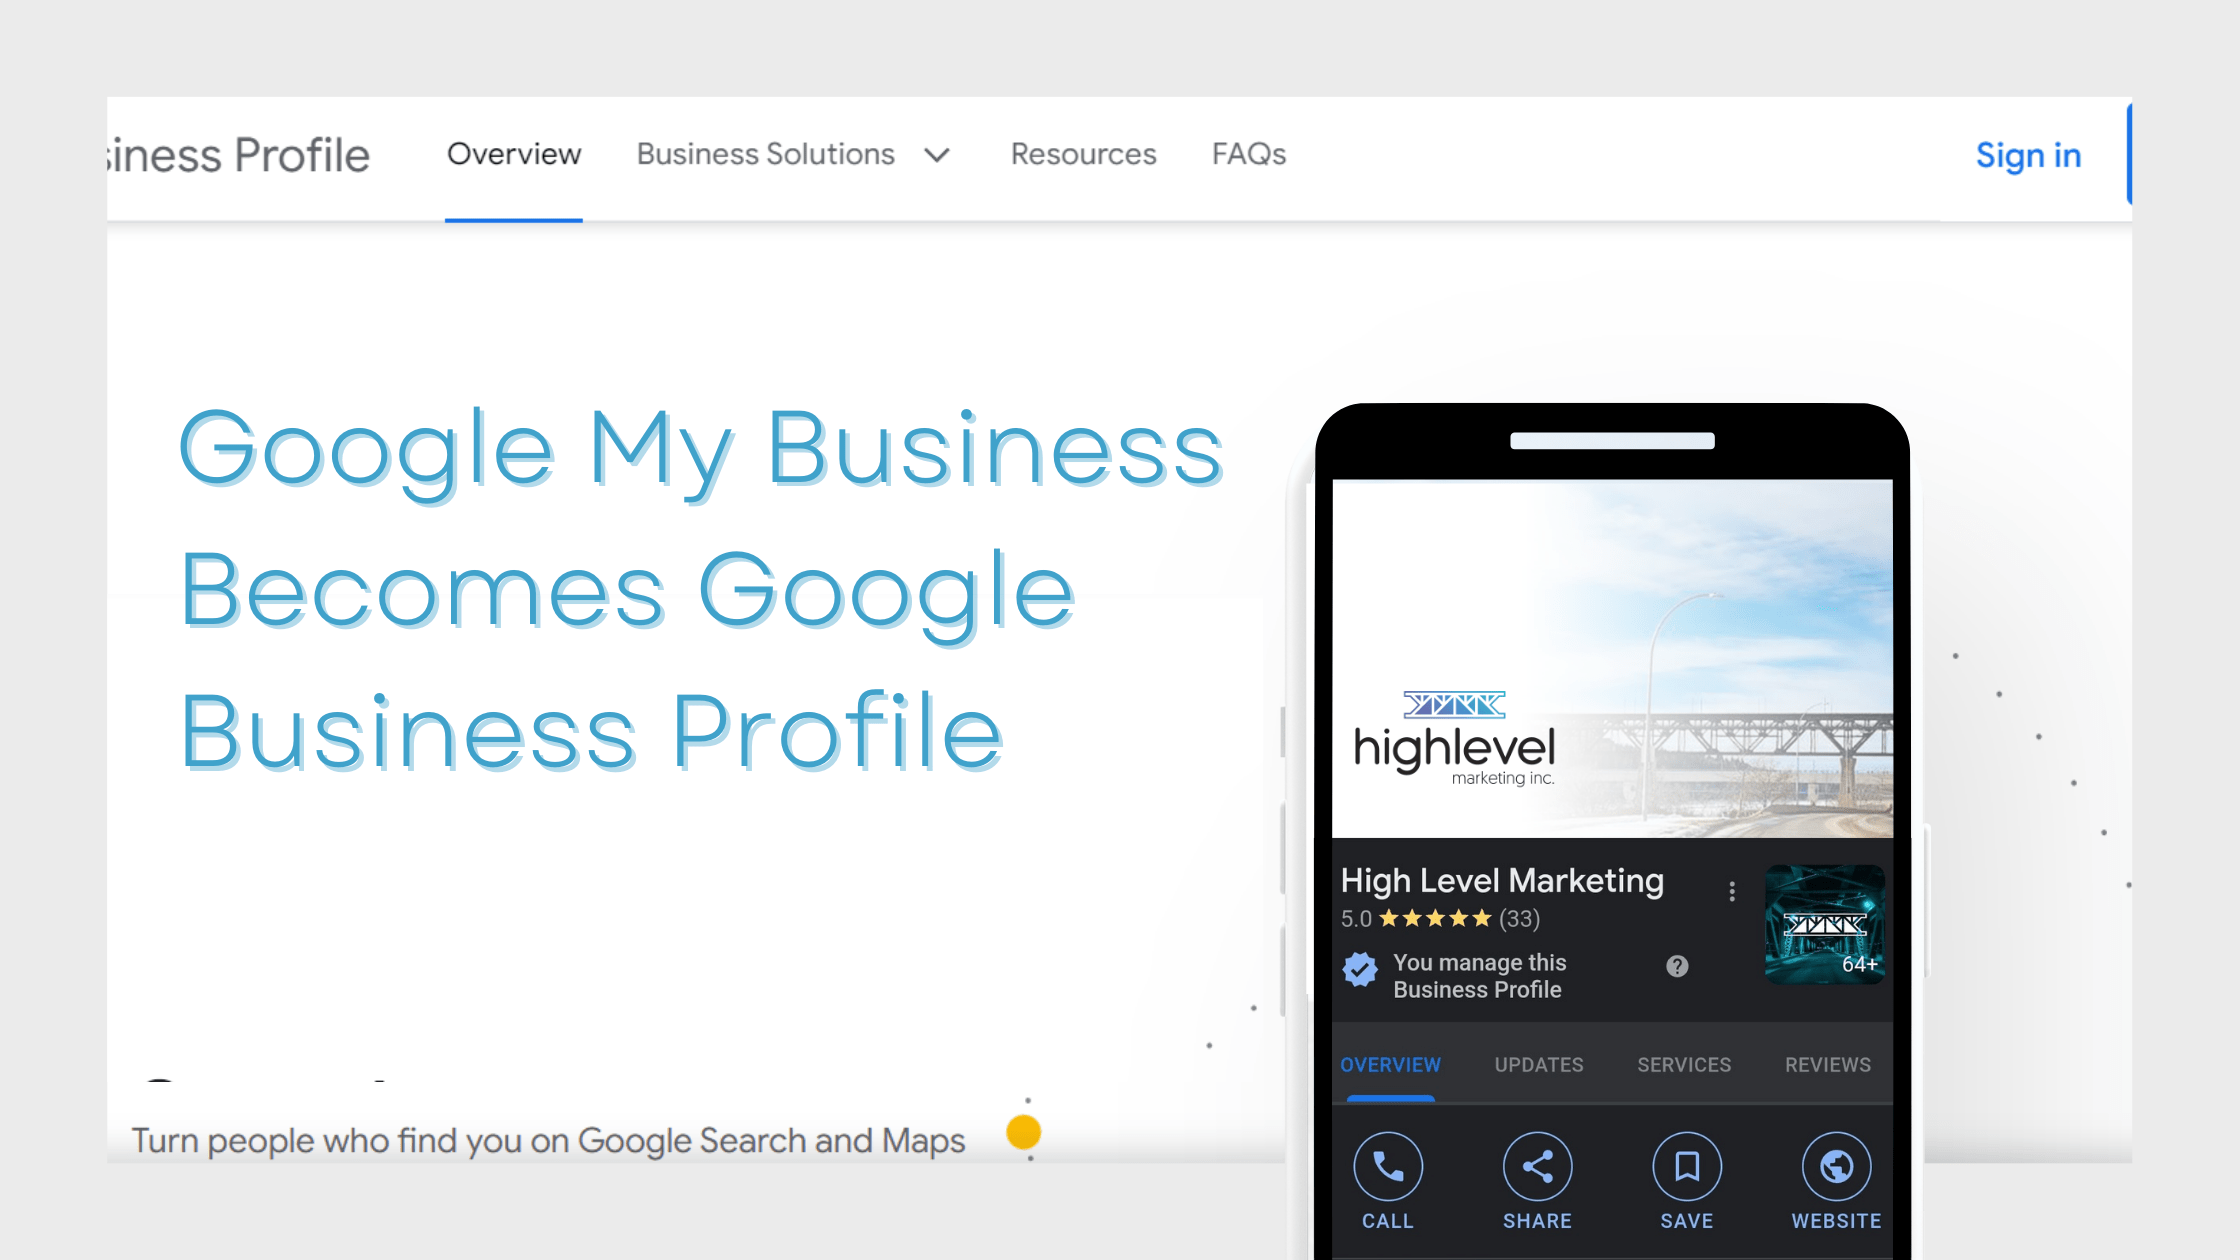 Google My Business Becomes Google Business Profile